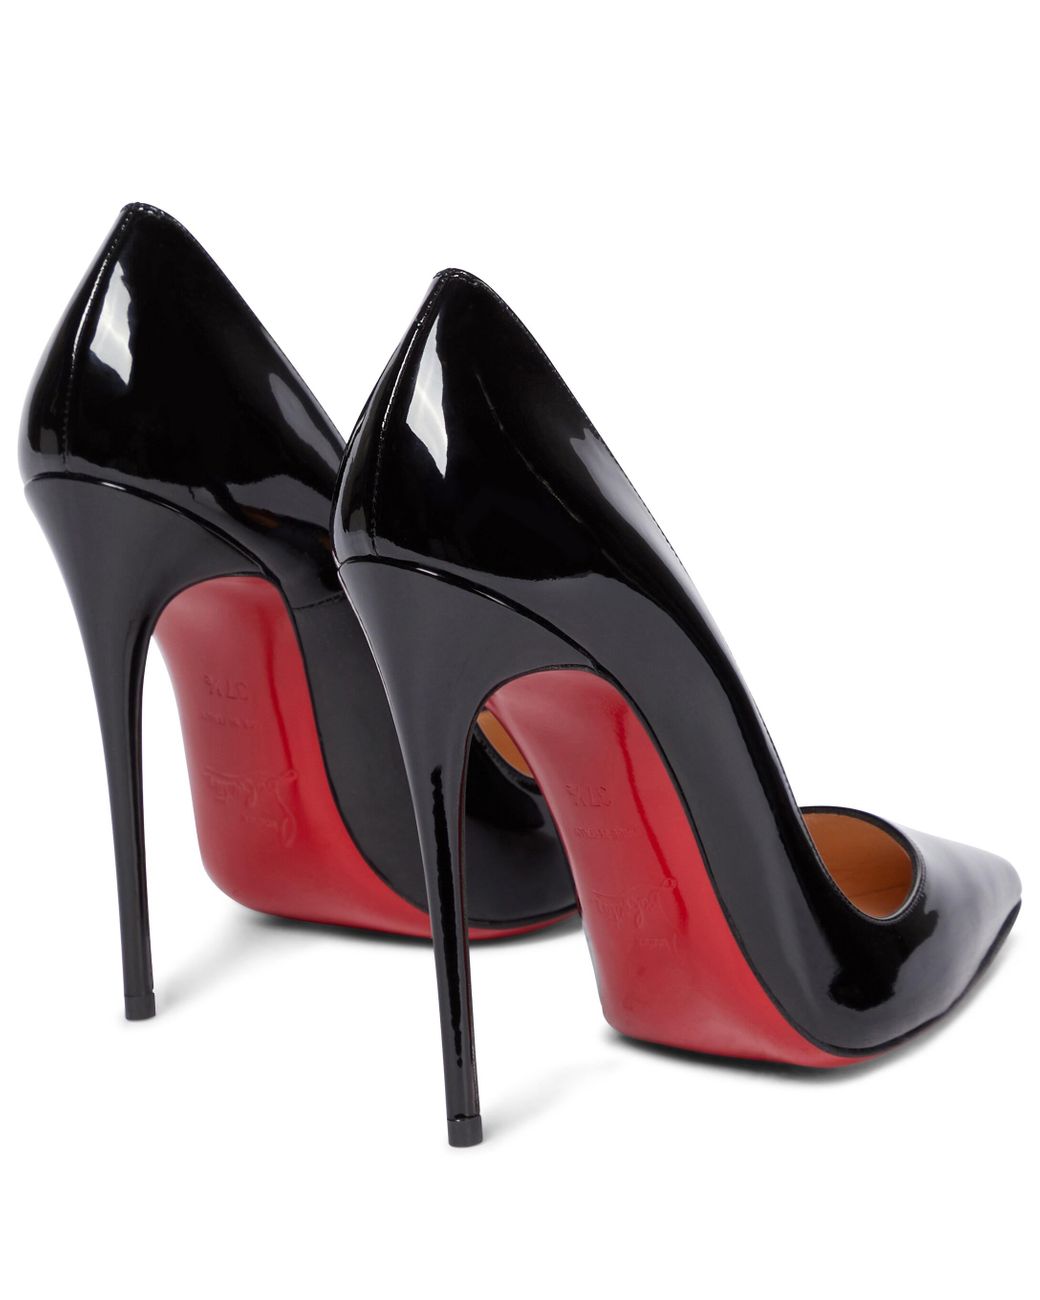 Christian Louboutin So Kate 120 Patent Leather Pumps in Black - Lyst